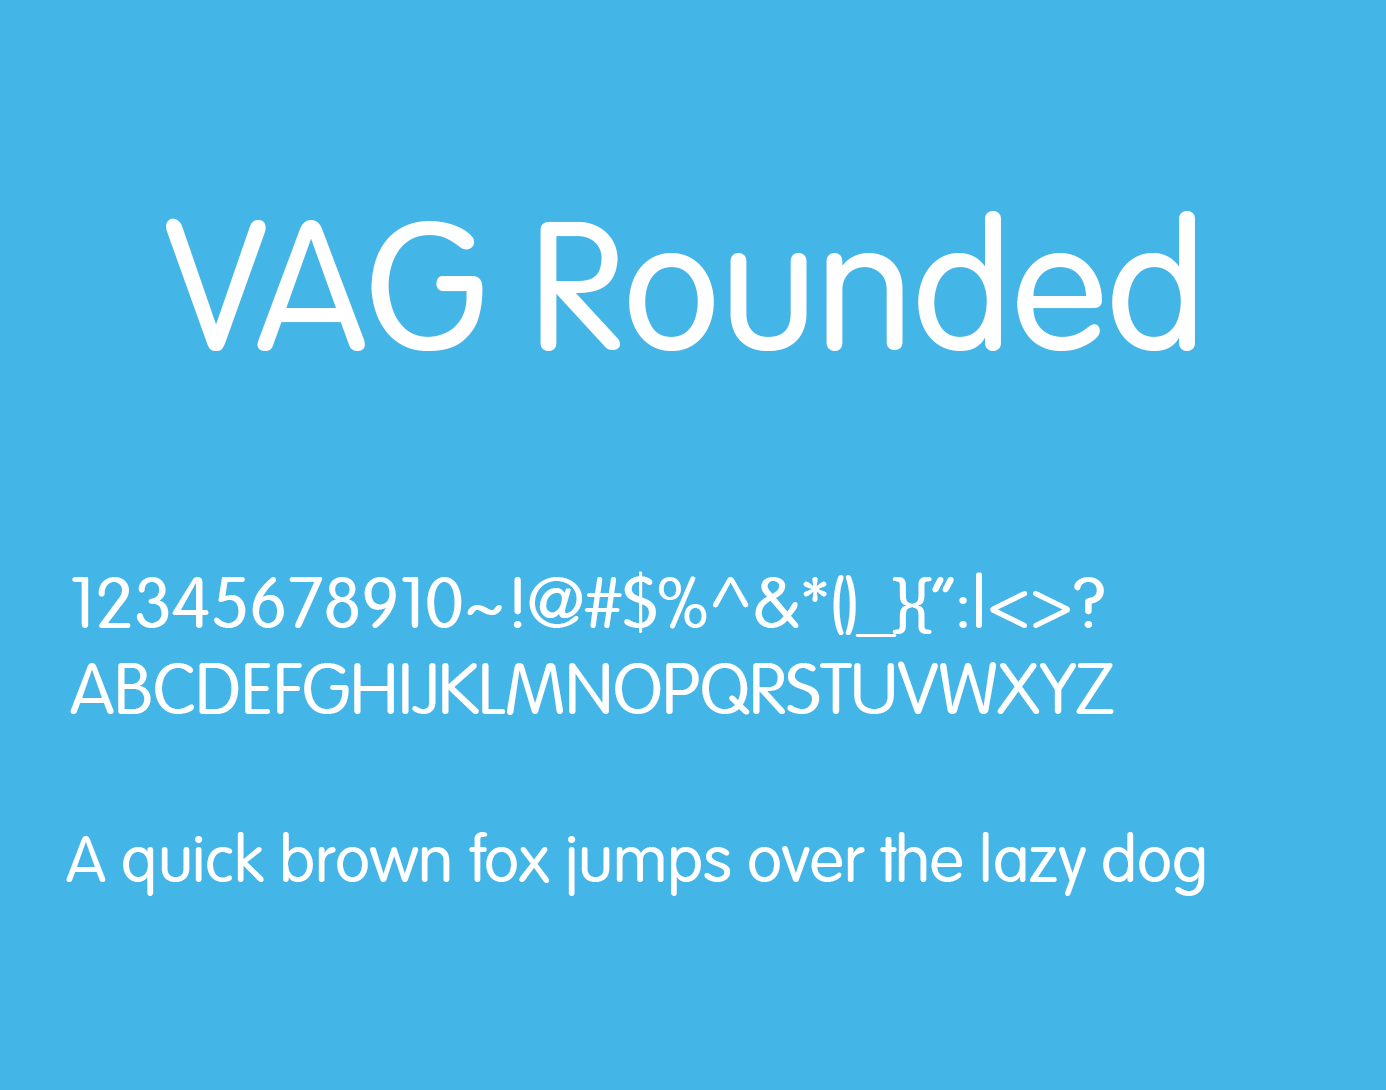 Vag rounded font free download mac